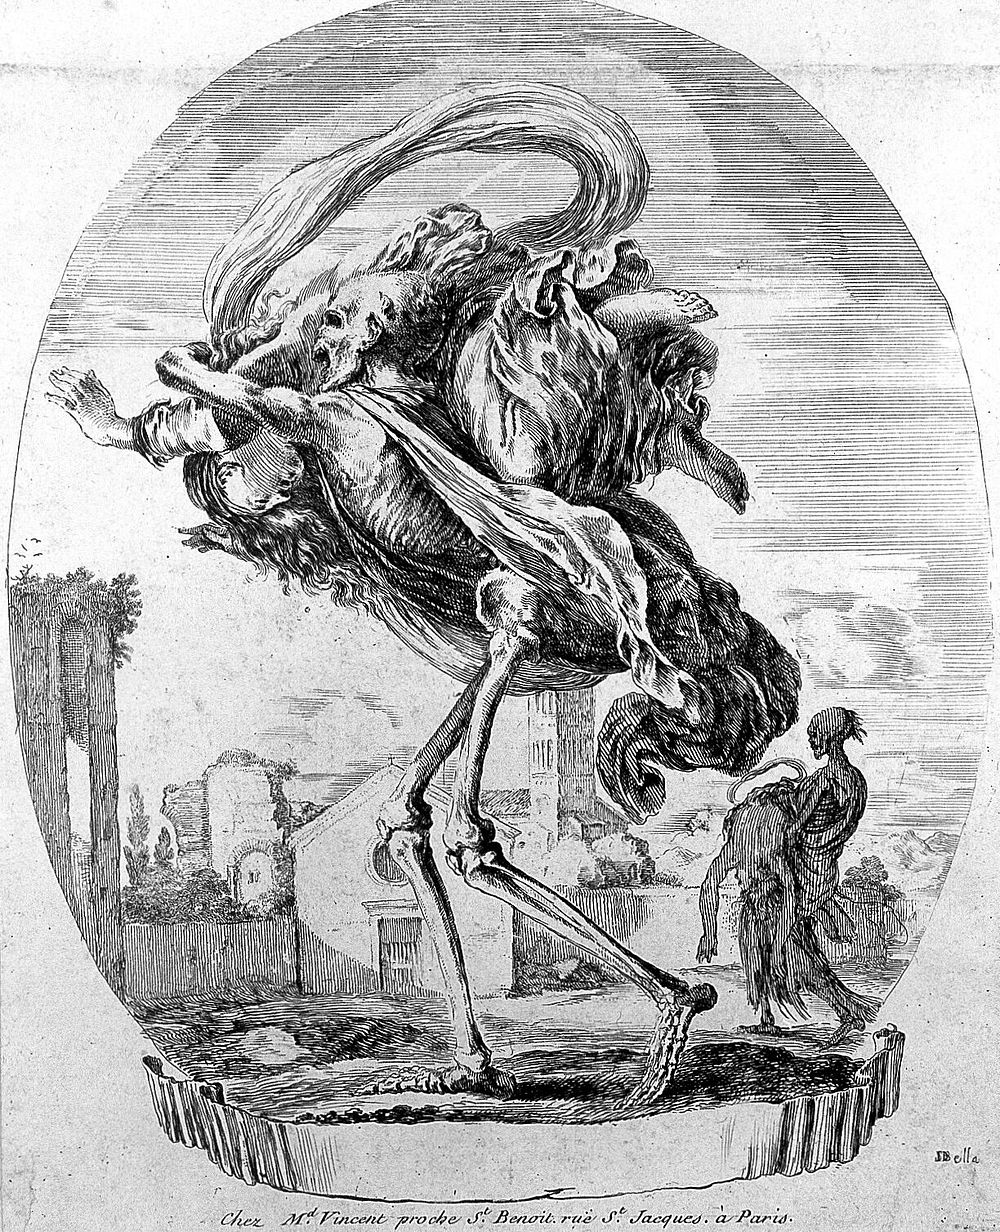 Death carries a woman over his shoulders. Etching by Stefano della Bella.